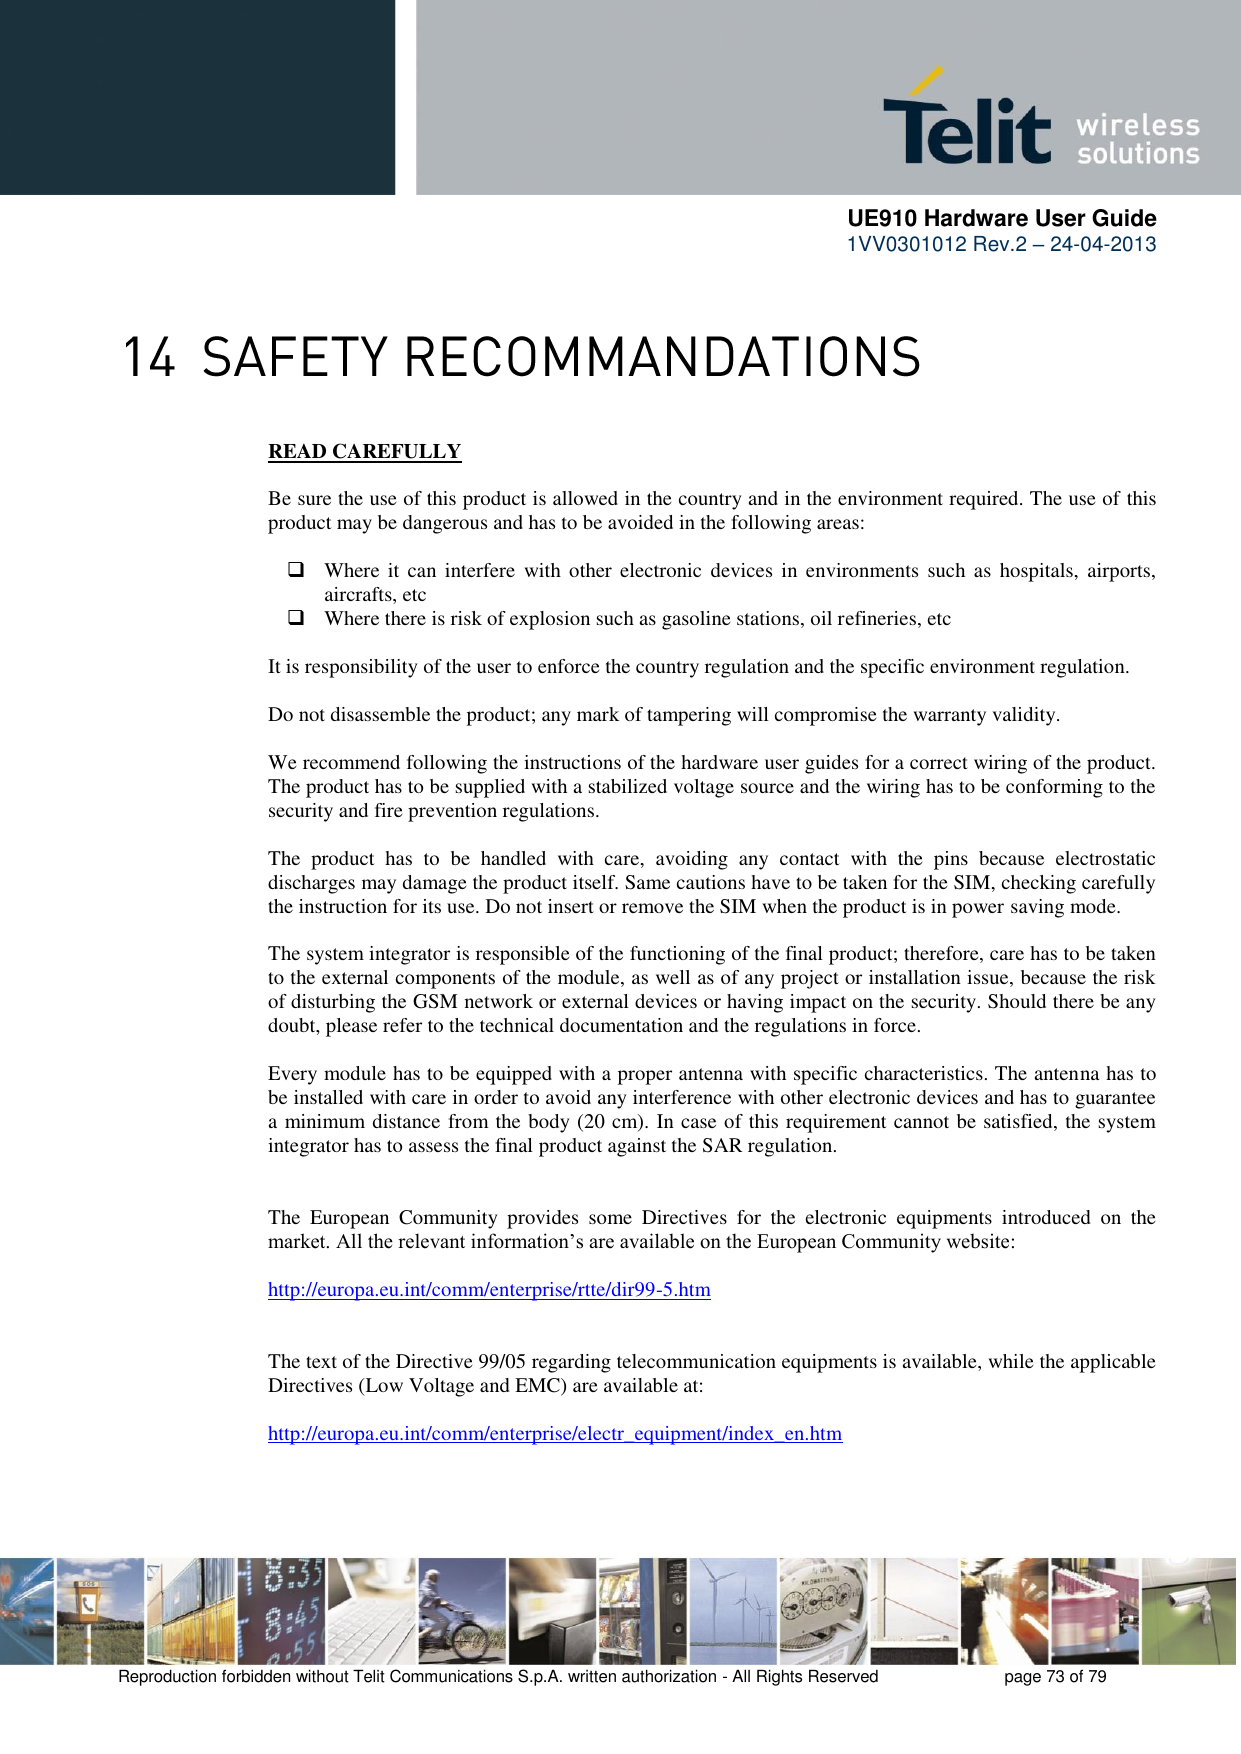      UE910 Hardware User Guide  1VV0301012 Rev.2 – 24-04-2013    Reproduction forbidden without Telit Communications S.p.A. written authorization - All Rights Reserved    page 73 of 79   READ CAREFULLY  Be sure the use of this product is allowed in the country and in the environment required. The use of this product may be dangerous and has to be avoided in the following areas:   Where  it  can interfere  with other  electronic devices  in environments  such as  hospitals, airports, aircrafts, etc  Where there is risk of explosion such as gasoline stations, oil refineries, etc   It is responsibility of the user to enforce the country regulation and the specific environment regulation.  Do not disassemble the product; any mark of tampering will compromise the warranty validity.  We recommend following the instructions of the hardware user guides for a correct wiring of the product. The product has to be supplied with a stabilized voltage source and the wiring has to be conforming to the security and fire prevention regulations.  The  product  has  to  be  handled  with  care,  avoiding  any  contact  with  the  pins  because  electrostatic discharges may damage the product itself. Same cautions have to be taken for the SIM, checking carefully the instruction for its use. Do not insert or remove the SIM when the product is in power saving mode.  The system integrator is responsible of the functioning of the final product; therefore, care has to be taken to the external components of the module, as well as of any project or installation issue, because the risk of disturbing the GSM network or external devices or having impact on the security. Should there be any doubt, please refer to the technical documentation and the regulations in force.  Every module has to be equipped with a proper antenna with specific characteristics. The antenna has to be installed with care in order to avoid any interference with other electronic devices and has to guarantee a minimum distance from the body (20 cm). In case of this requirement cannot be satisfied, the system integrator has to assess the final product against the SAR regulation.   The  European  Community  provides  some  Directives  for  the  electronic  equipments  introduced  on  the market. All the relevant information’s are available on the European Community website:  http://europa.eu.int/comm/enterprise/rtte/dir99-5.htm     The text of the Directive 99/05 regarding telecommunication equipments is available, while the applicable Directives (Low Voltage and EMC) are available at:  http://europa.eu.int/comm/enterprise/electr_equipment/index_en.htm  